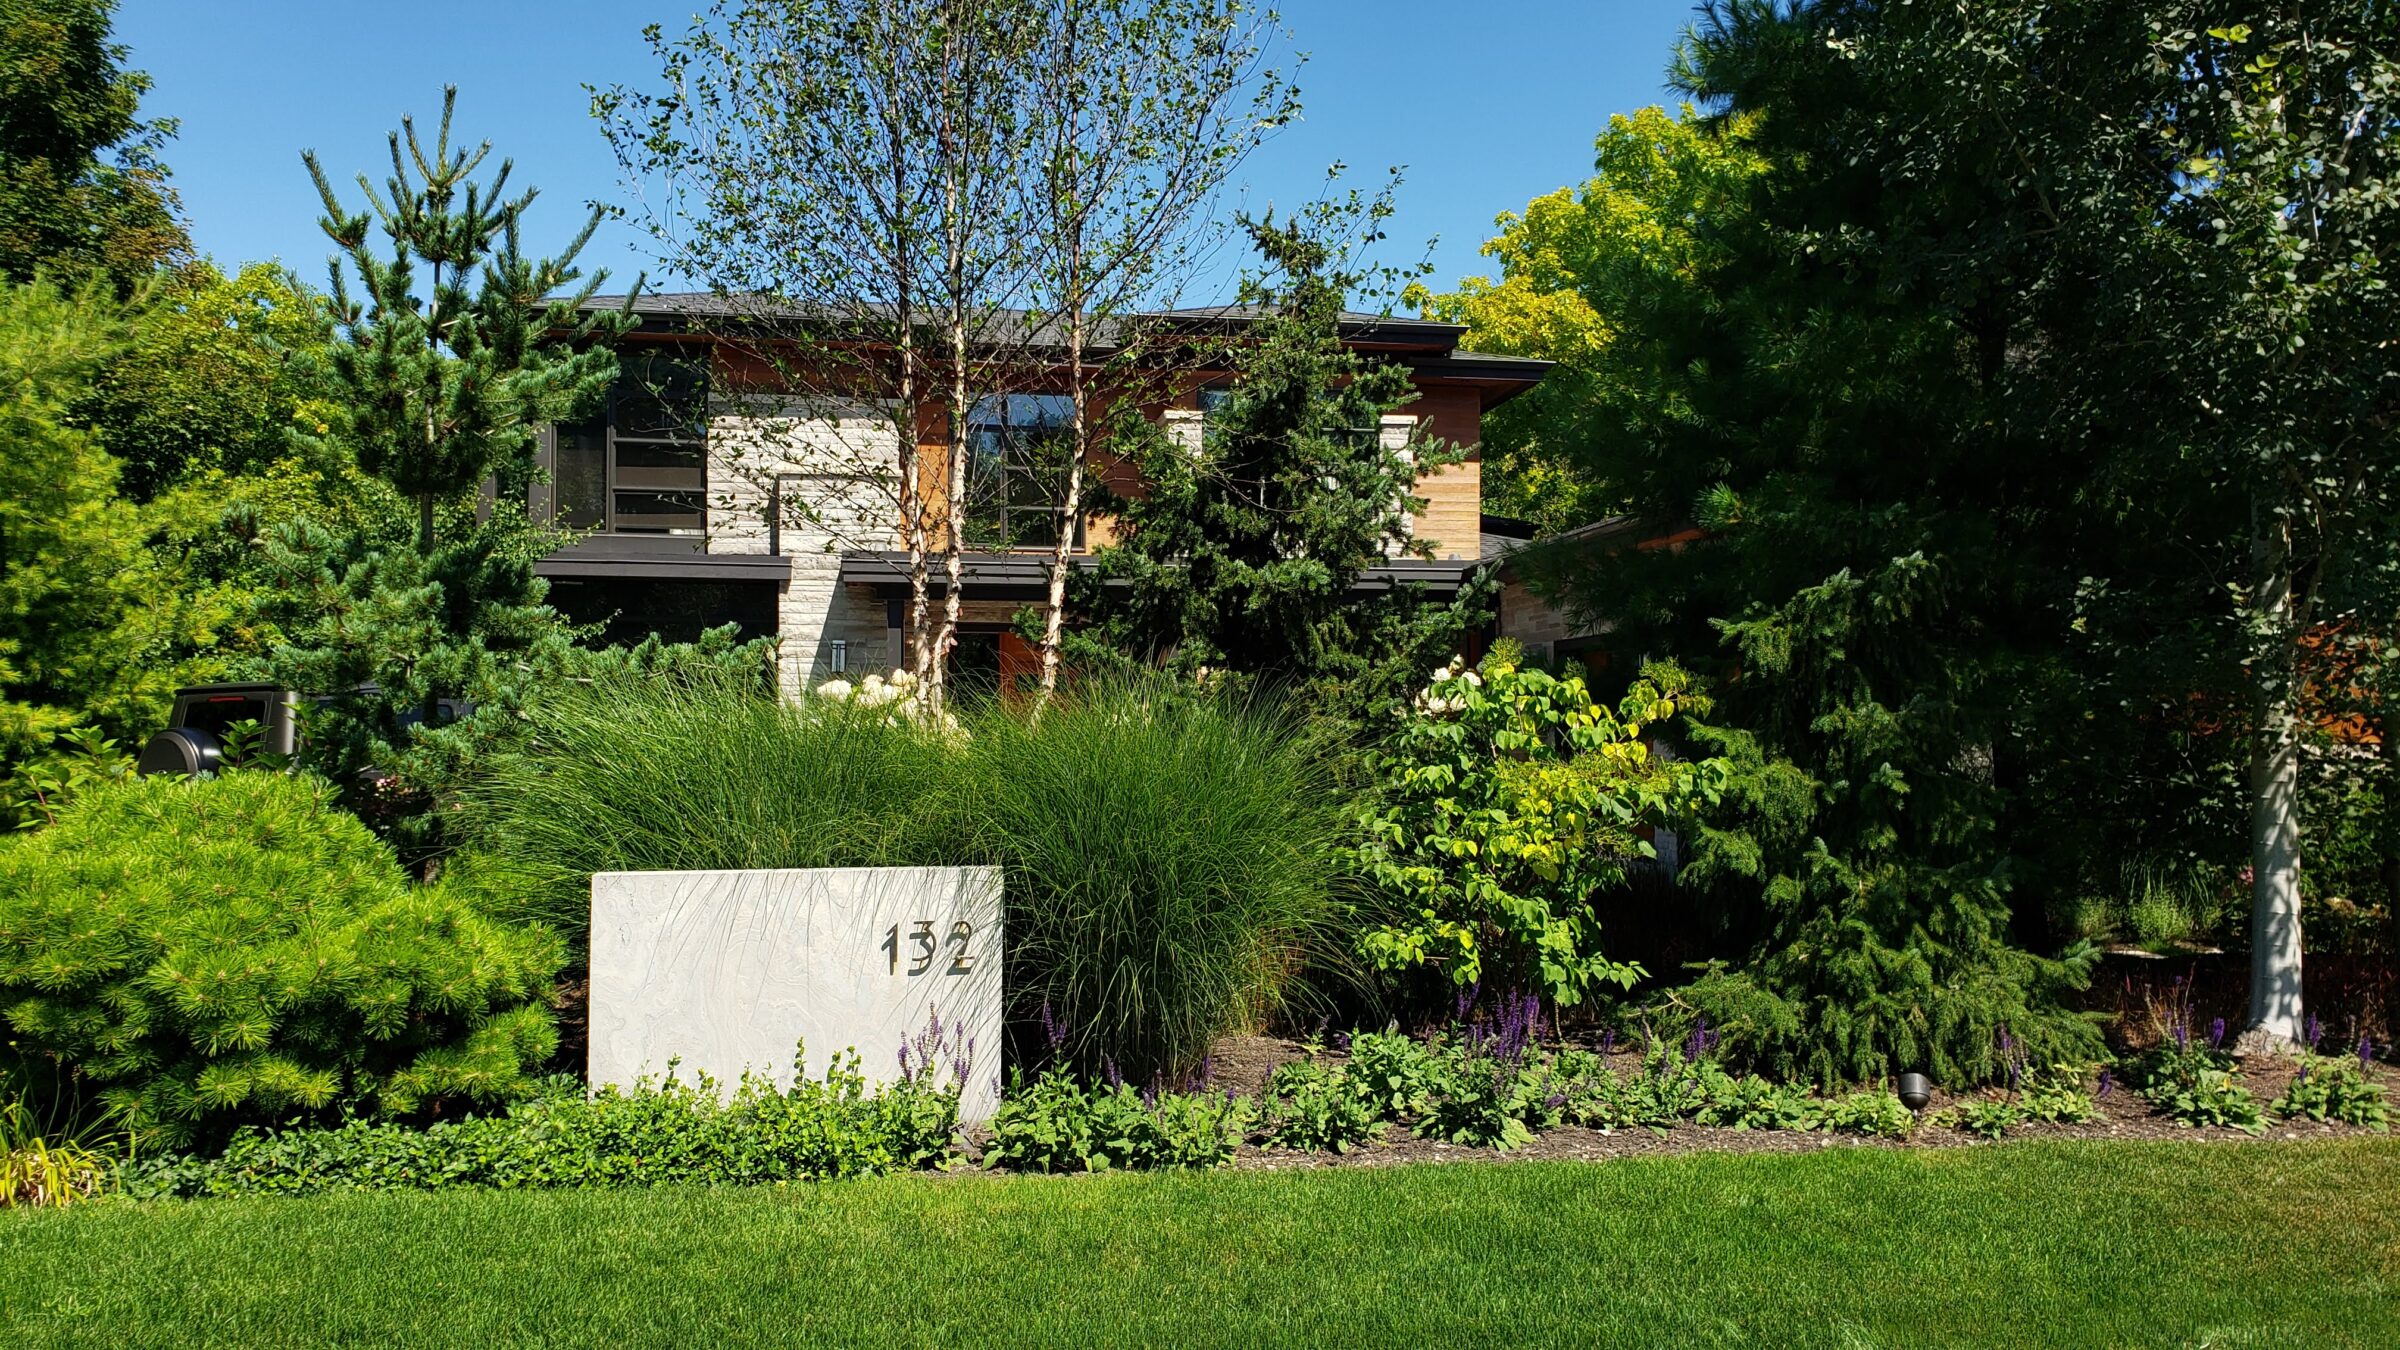 This image features a modern residential house obscured by lush greenery and mature trees, with a large stone displaying the address "132" prominently.